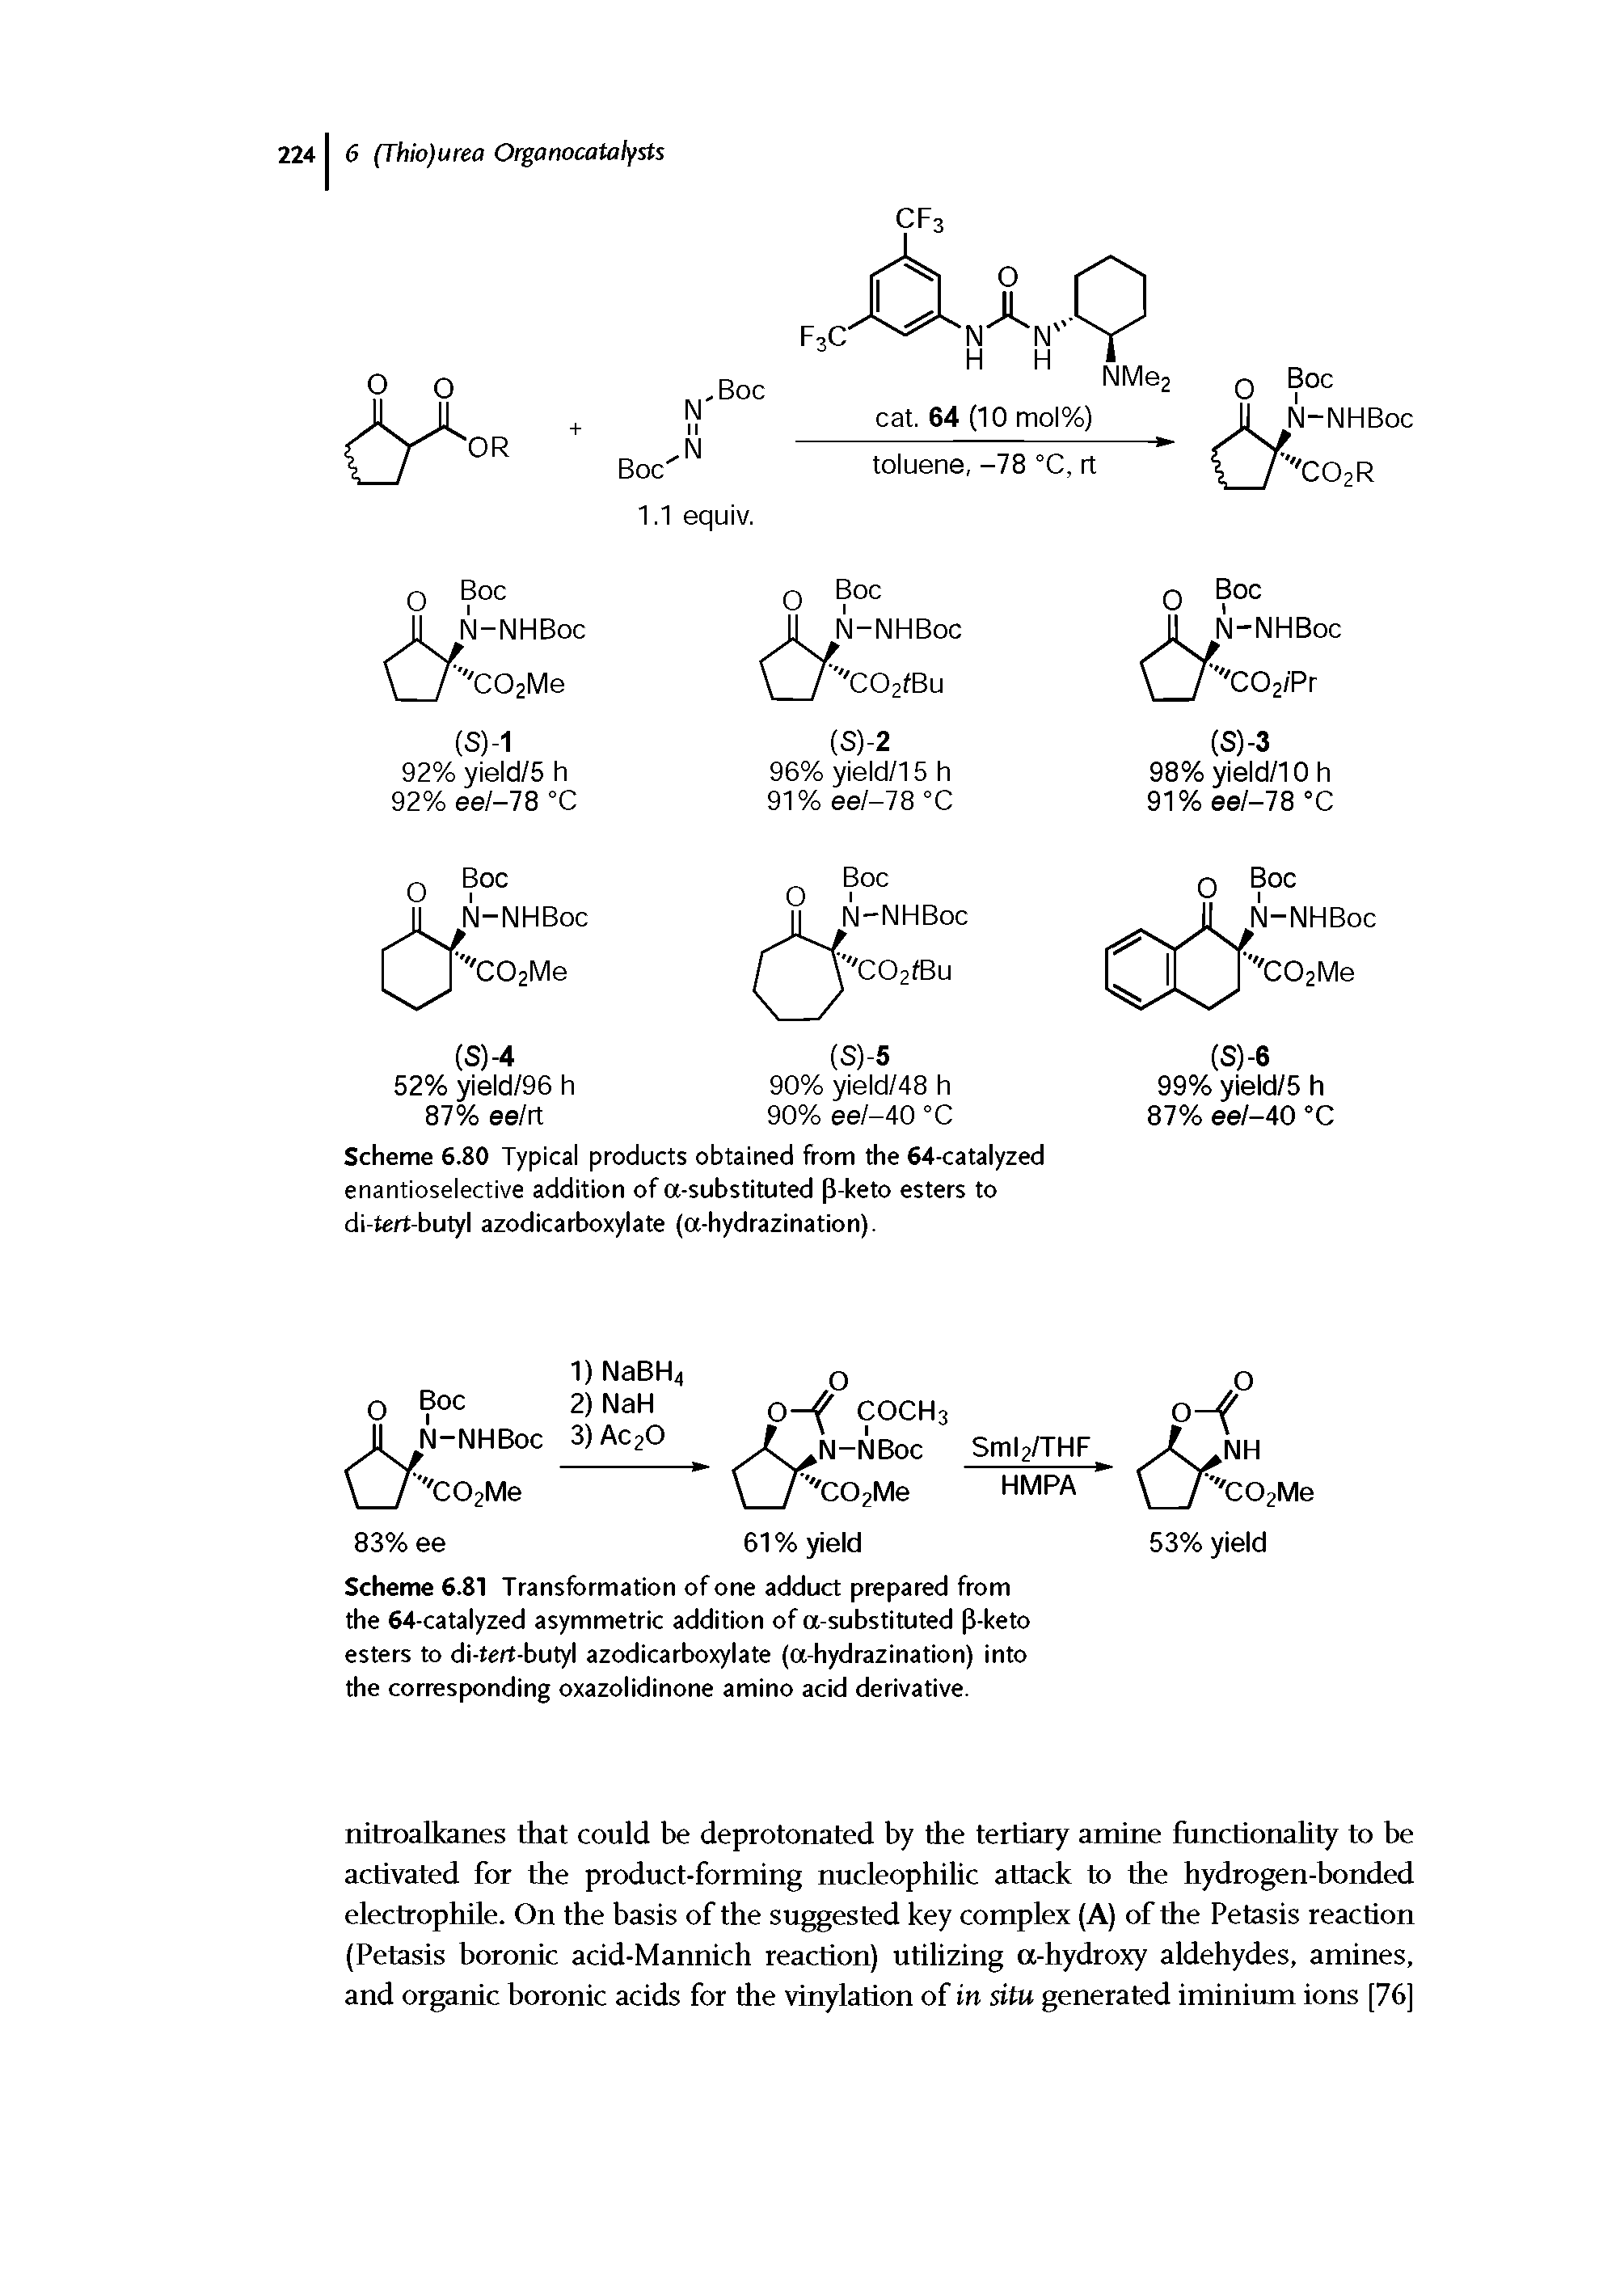 Scheme 6.80 Typical products obtained from the 64-catalyzed enantioselective addition of a-substituted (J-keto esters to di-tert-butyl azodicarboxylate (a-hydrazination).